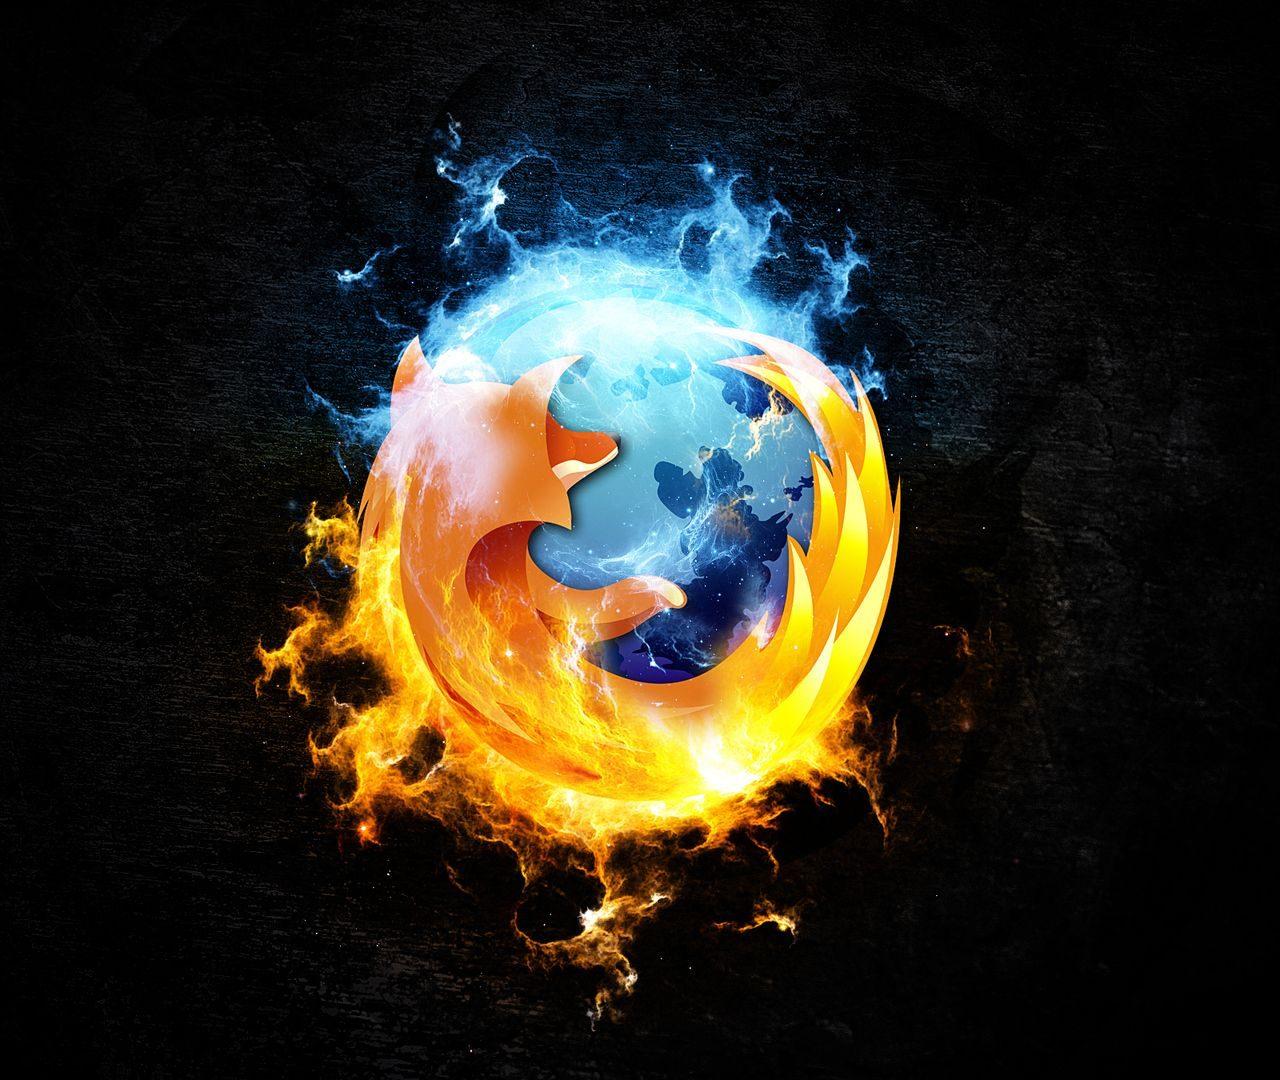 Cool Firefox Logo - Cool Wallpaper Of The Logo Of Mozilla Firefox Browser | PaperPull